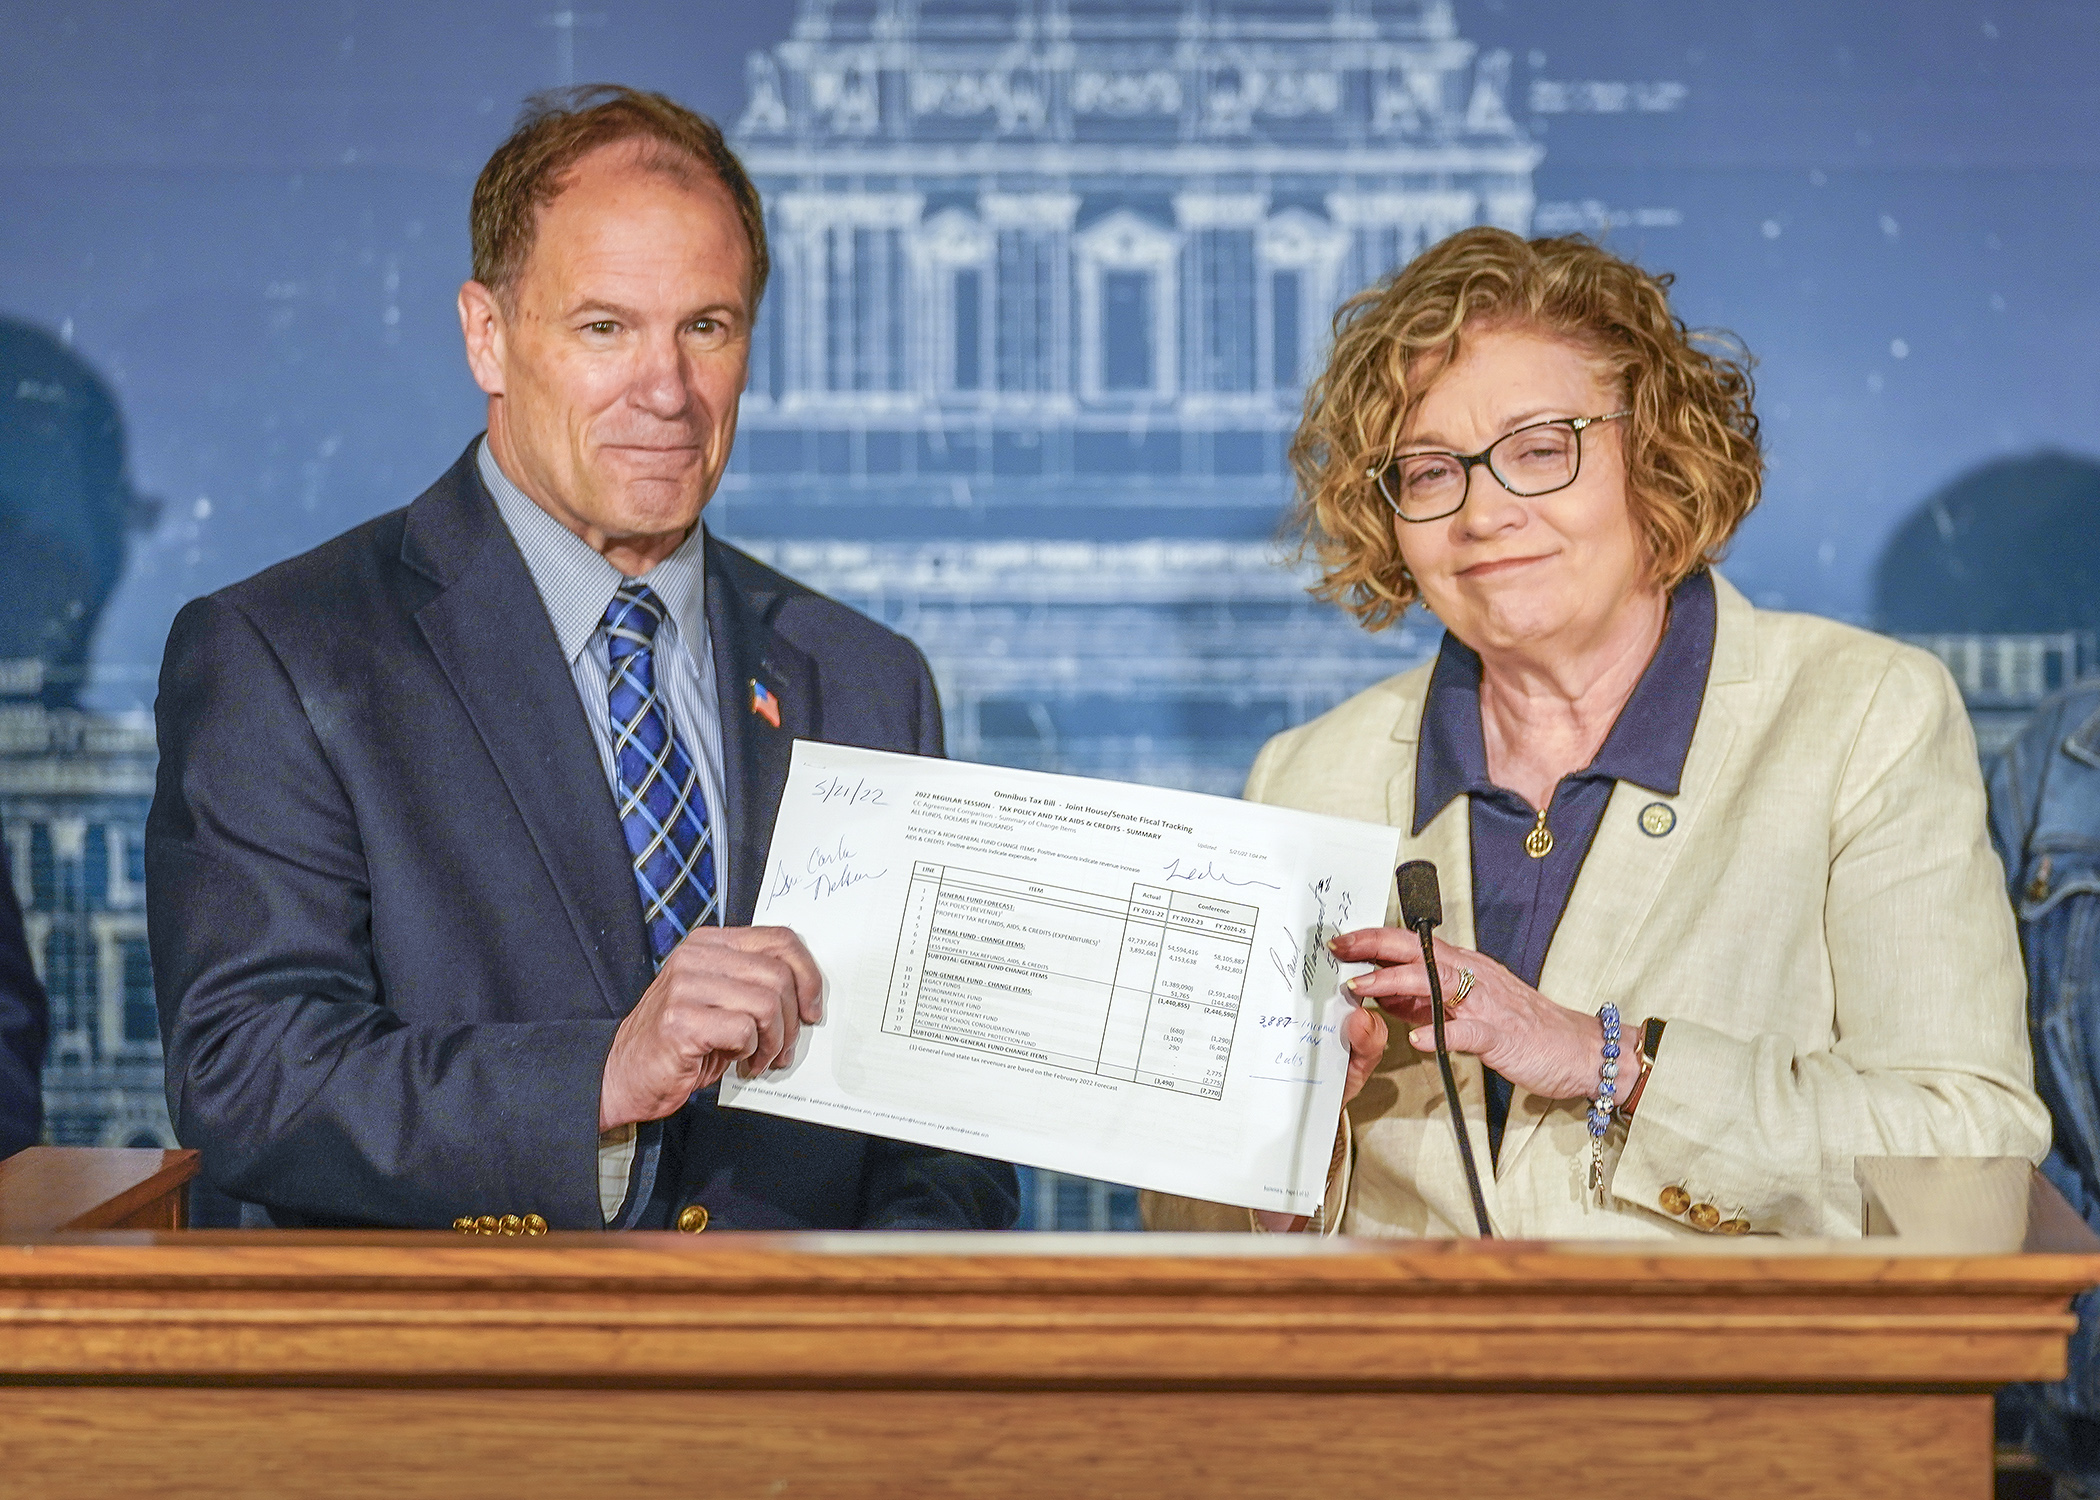 Rep. Paul Marquart and Sen. Carla Nelson, co-chairs of the taxes conference committee, announced and signed a tax bill agreement during a press conference May 21. (Photo by Andrew VonBank)